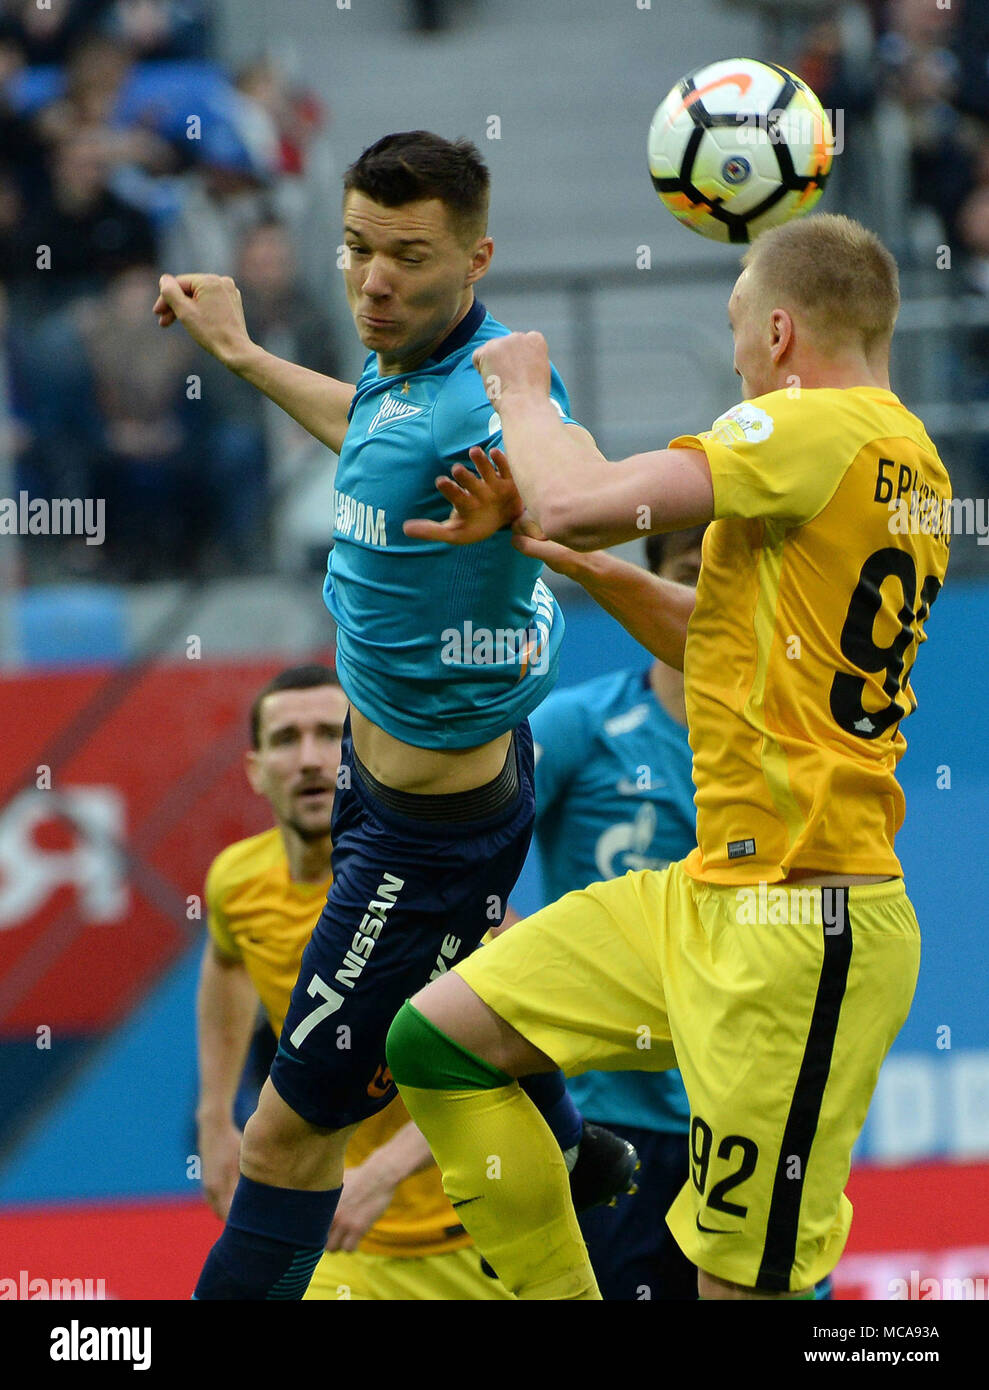 SÃO PETERSBURGO, MO - 14.04.2018: ZENIT X ANZHI - Russia. St. Petersburg. April 14, 2018. Players of ZENIT Dmitry Poloz and ANZHI Sergey Bryzgalov (from left to right) in a match of the Russian Football Championship between the ZENIT team (St. Petersburg) and team of ANZHI (Makhachkala). (Photo: Andrey Pronin/Fotoarena) Credit: Foto Arena LTDA/Alamy Live News Stock Photo